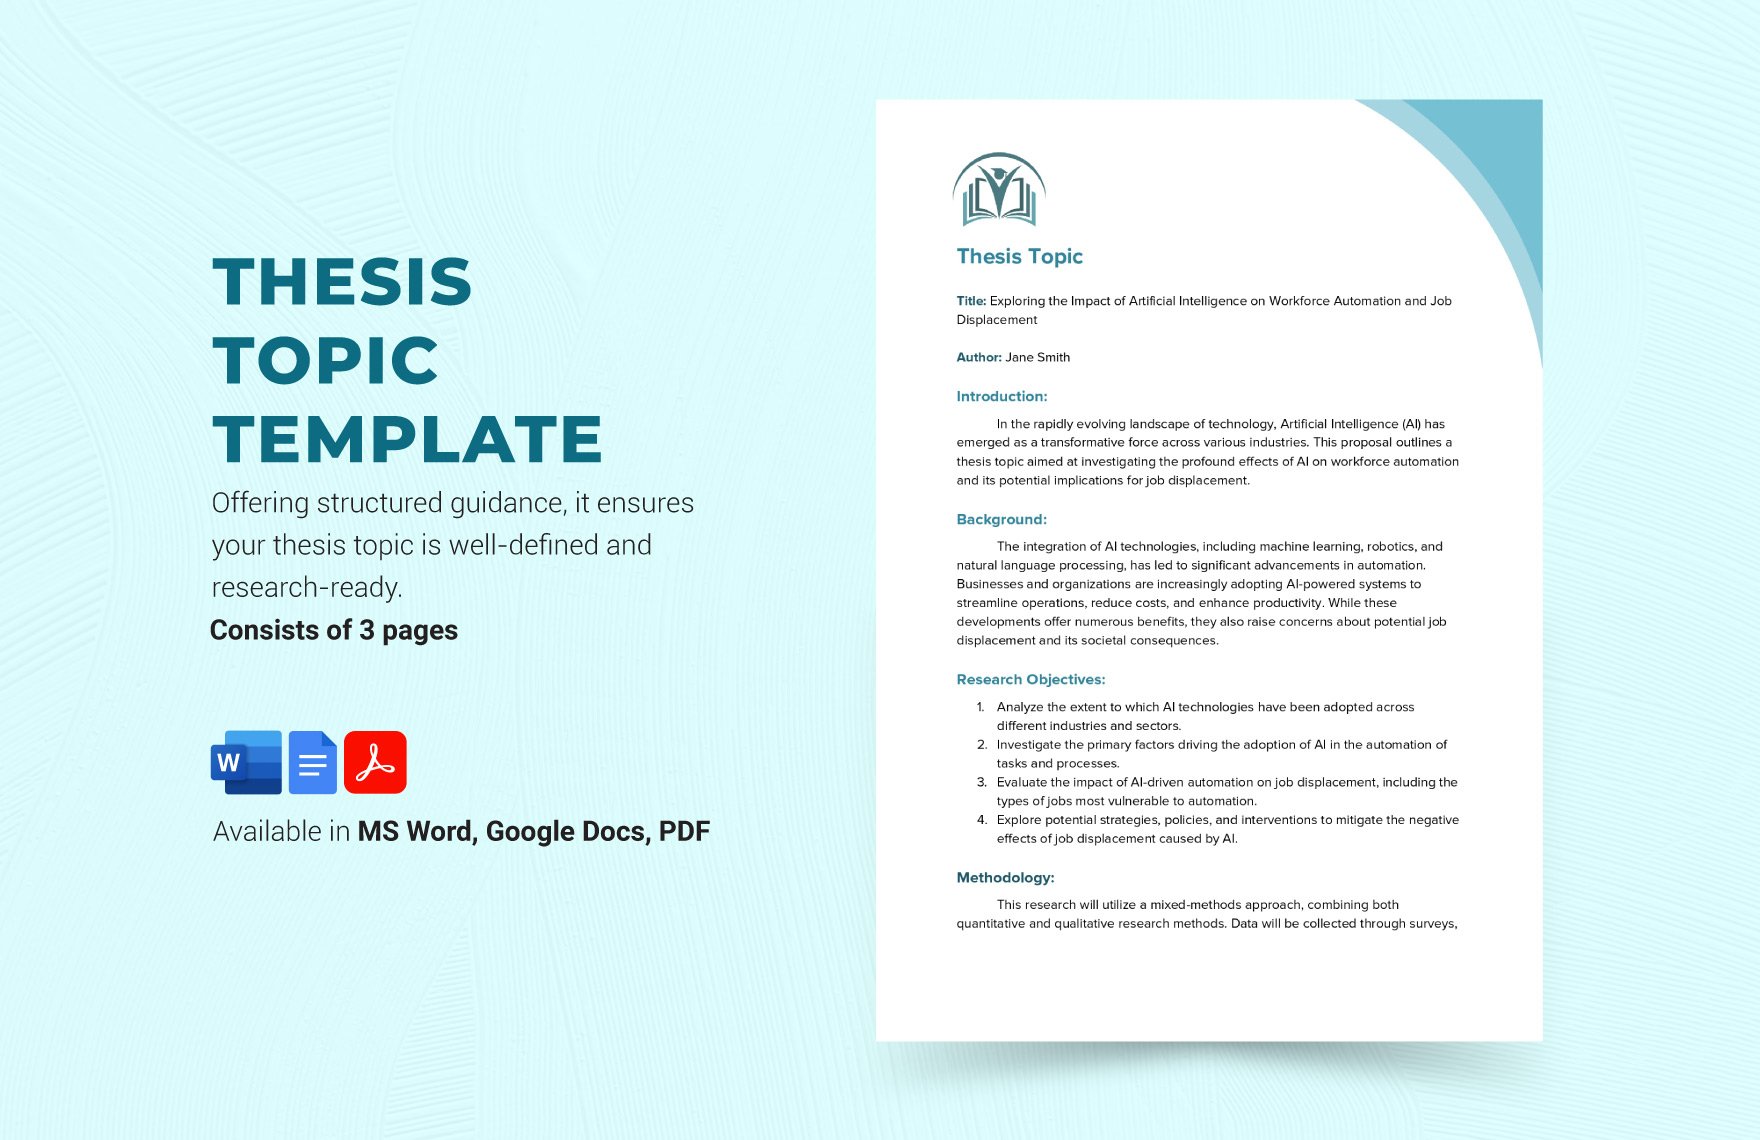 Free Thesis Topic Template in Word, Google Docs, PDF